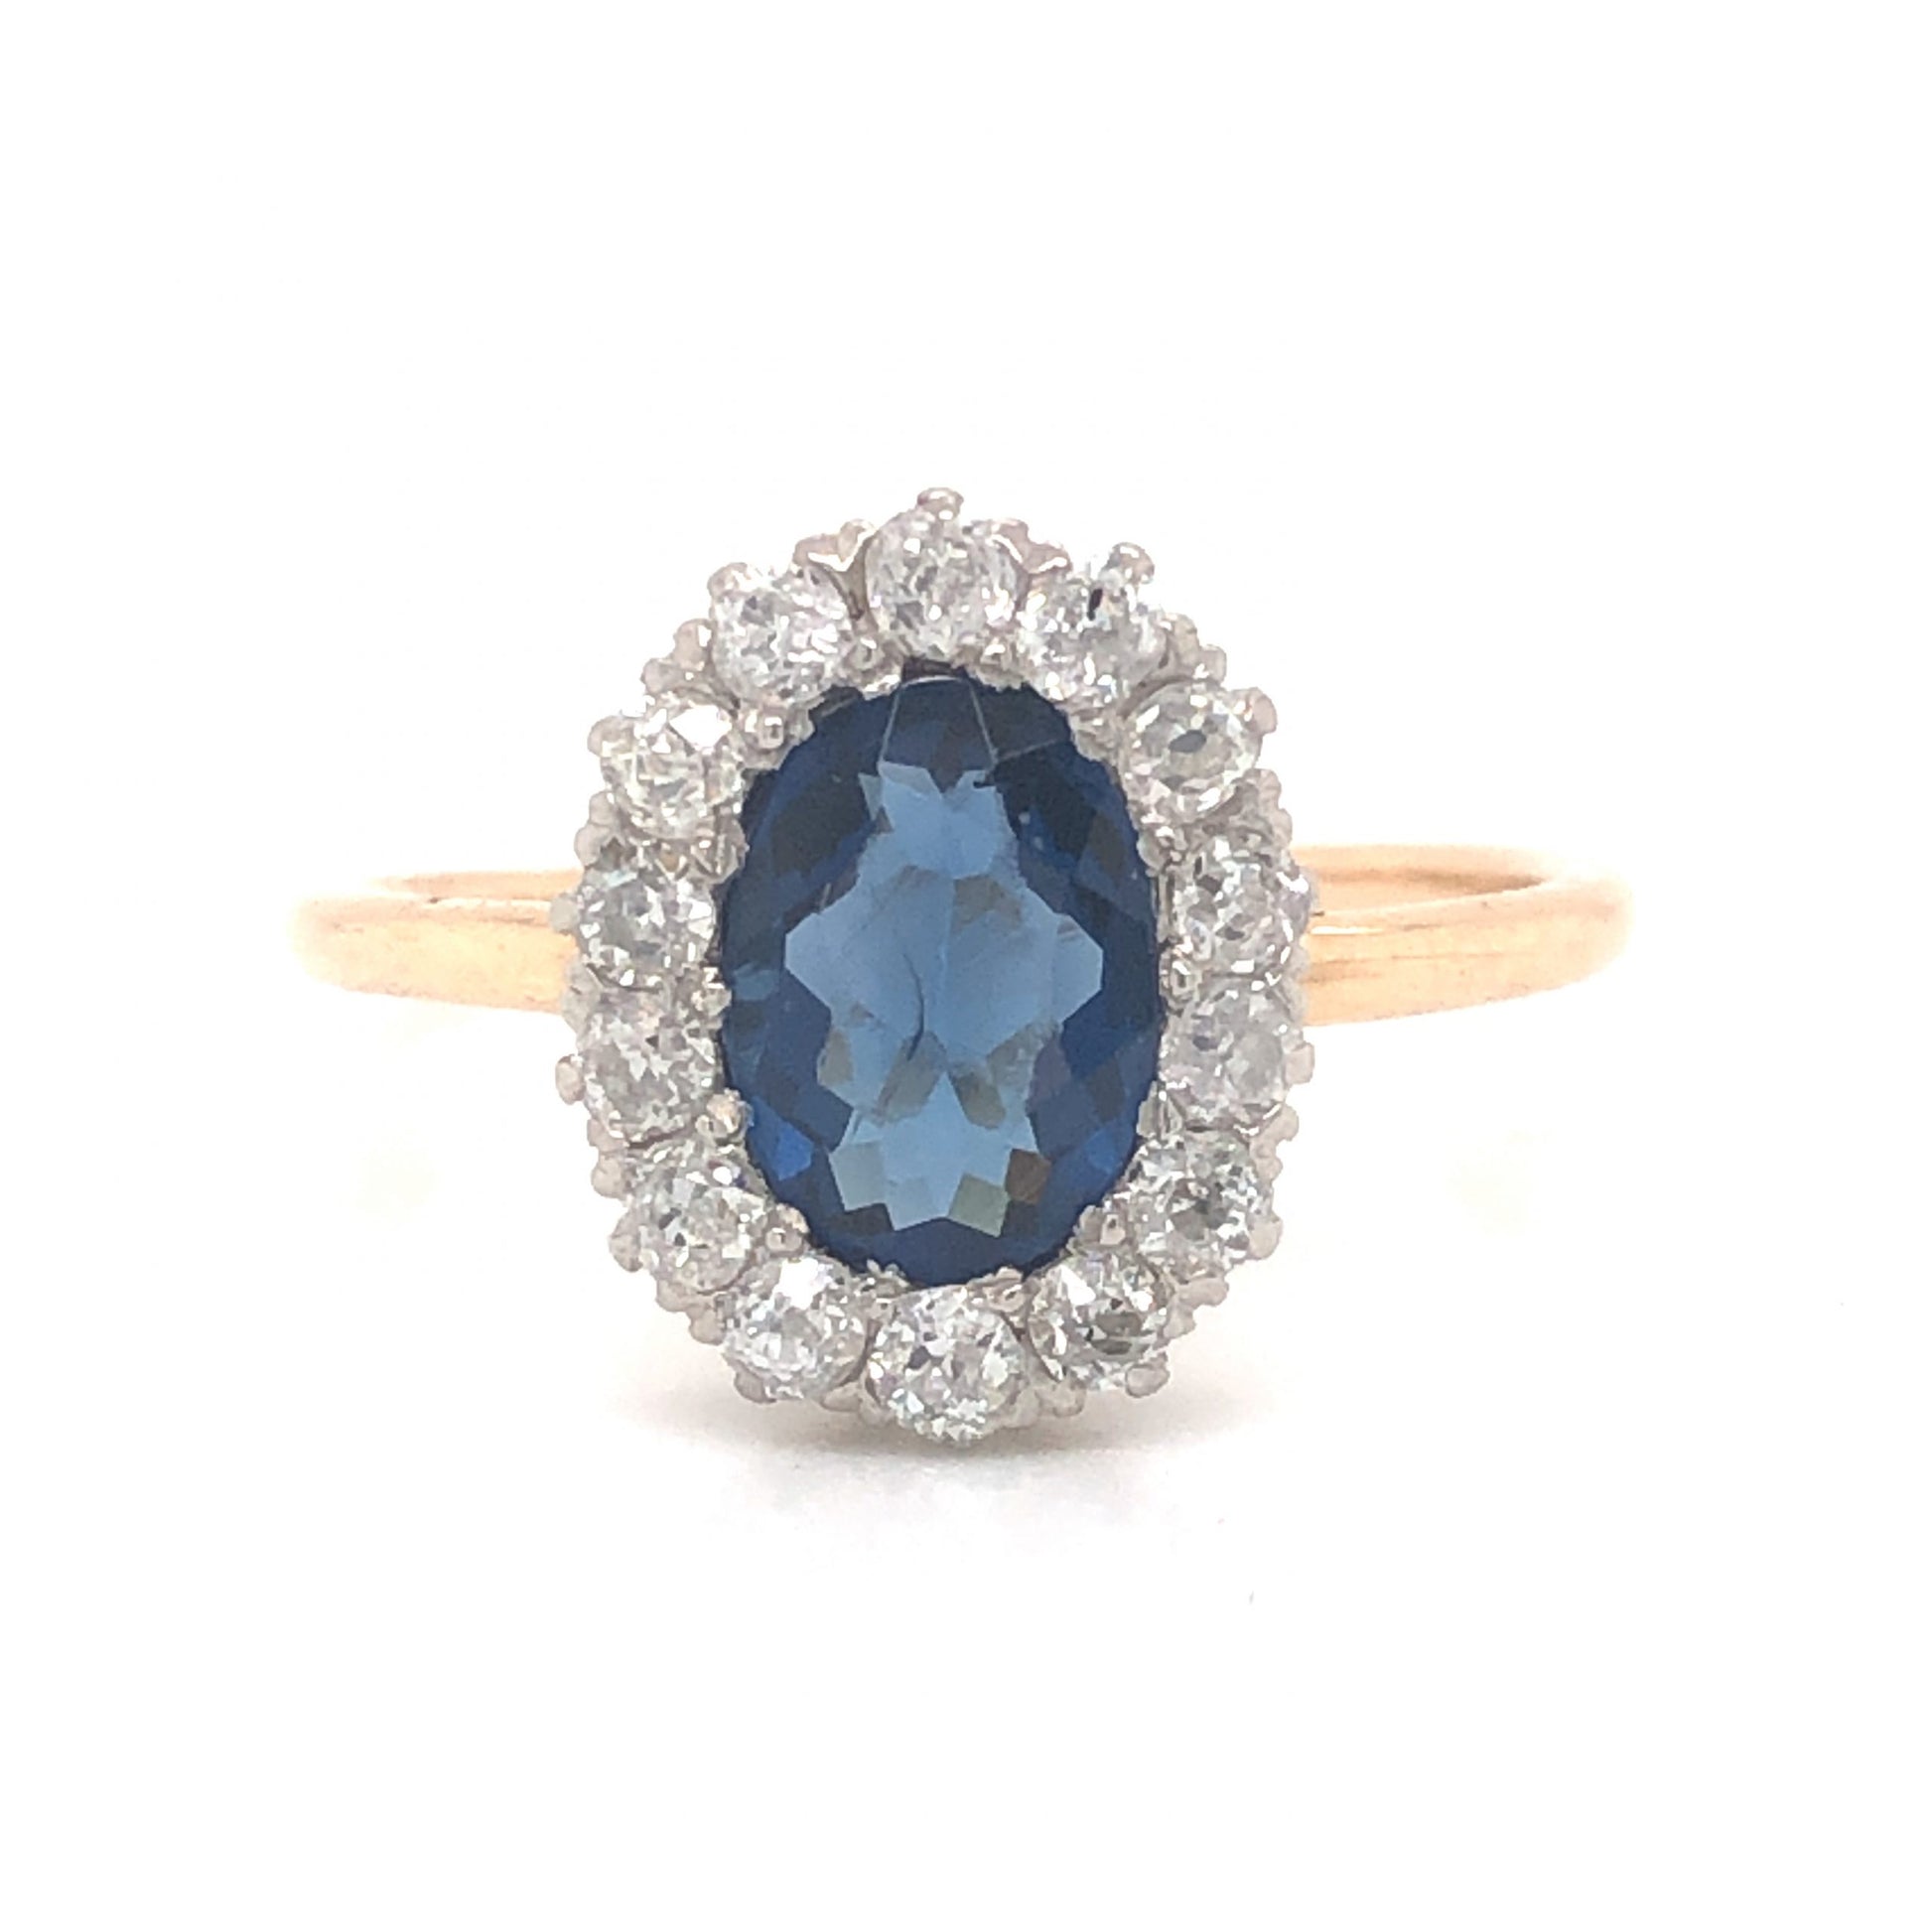 Victorian Oval Cut Sapphire & Diamond Ring in 14k Gold & PlatinumComposition: PlatinumRing Size: 6.25Total Diamond Weight: .56 ctTotal Gram Weight: 2.8 g